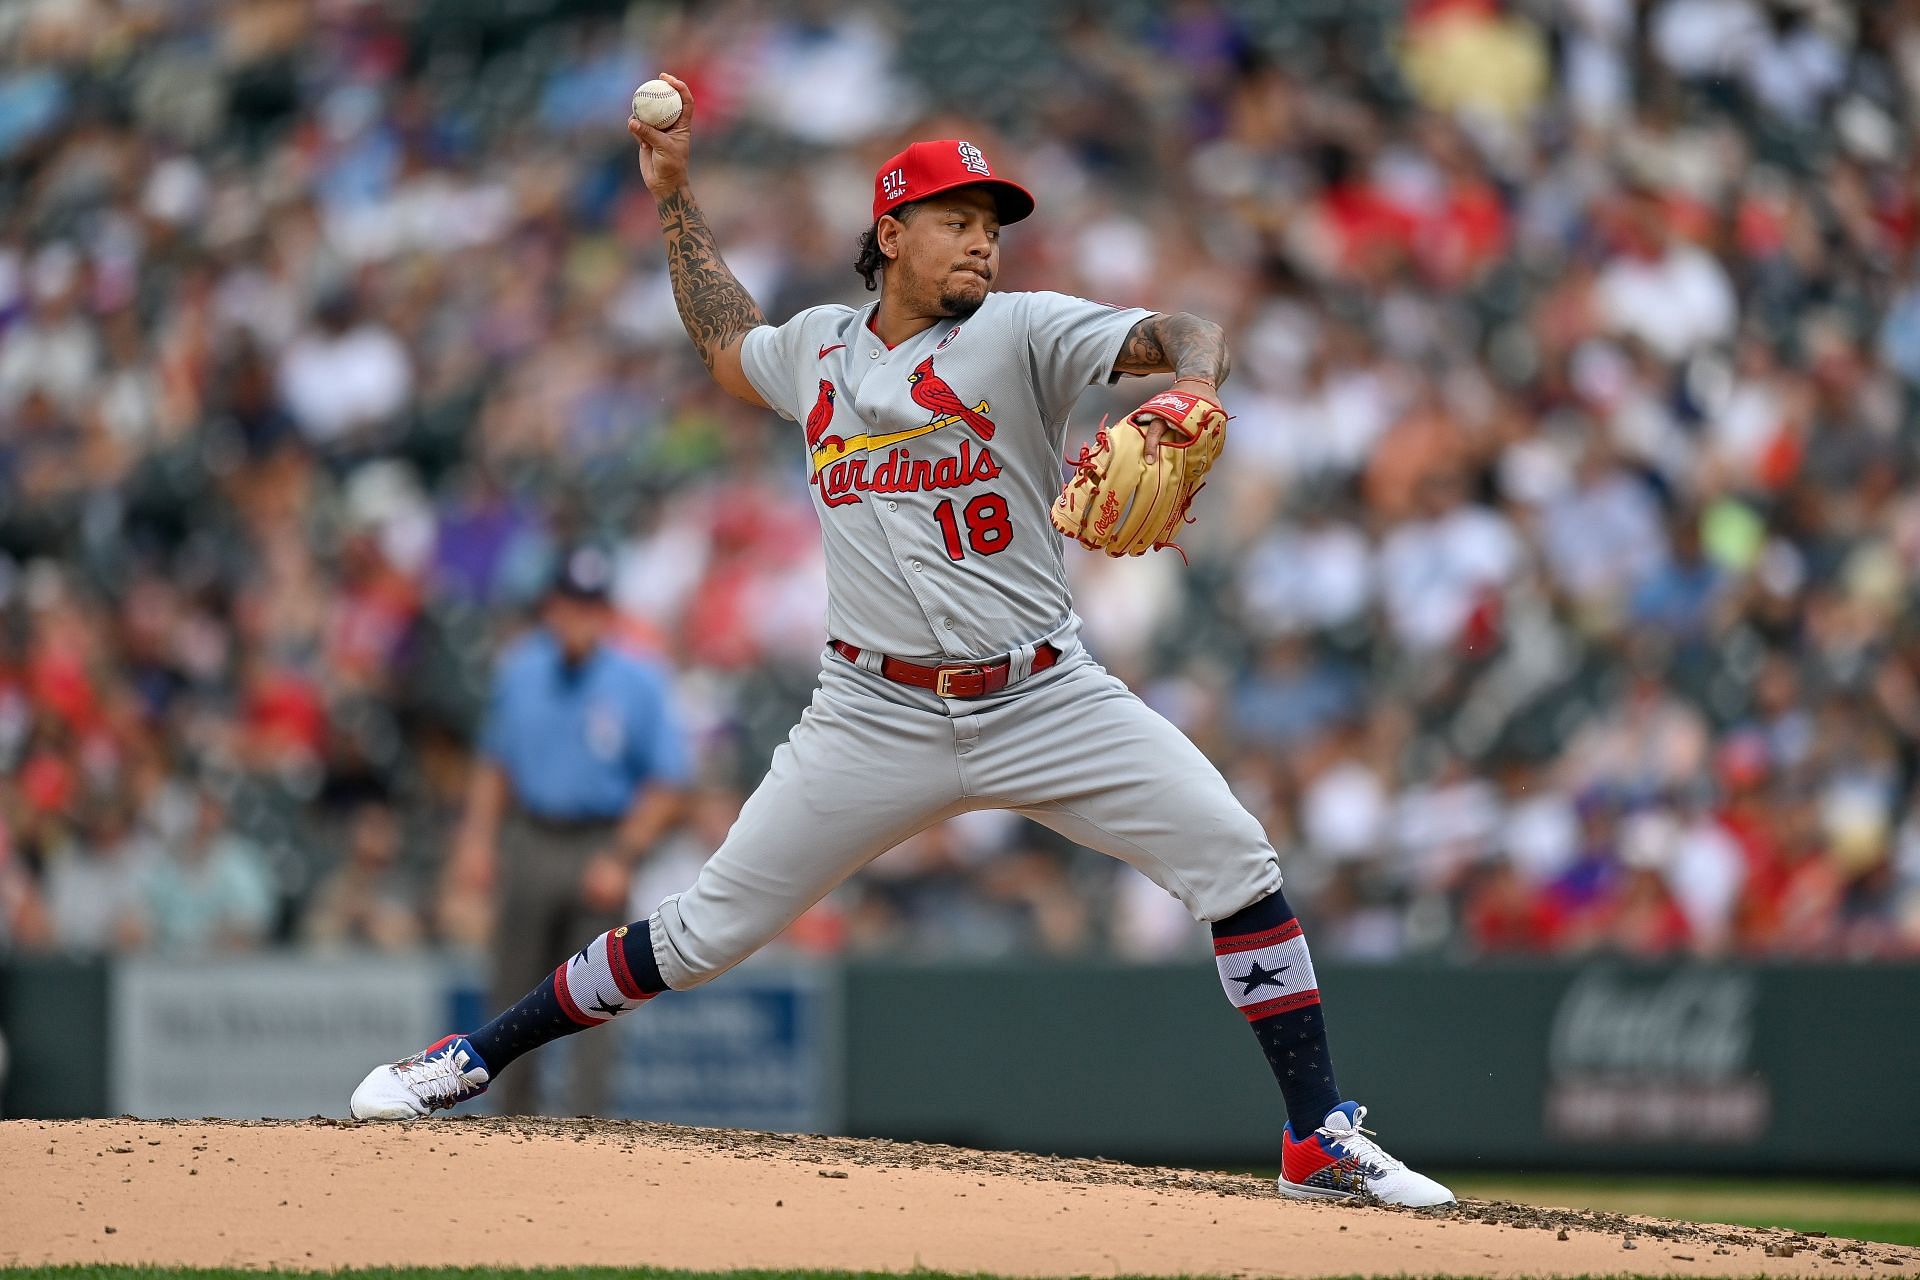 Carlos Martinez is another free agent signed by the Giants